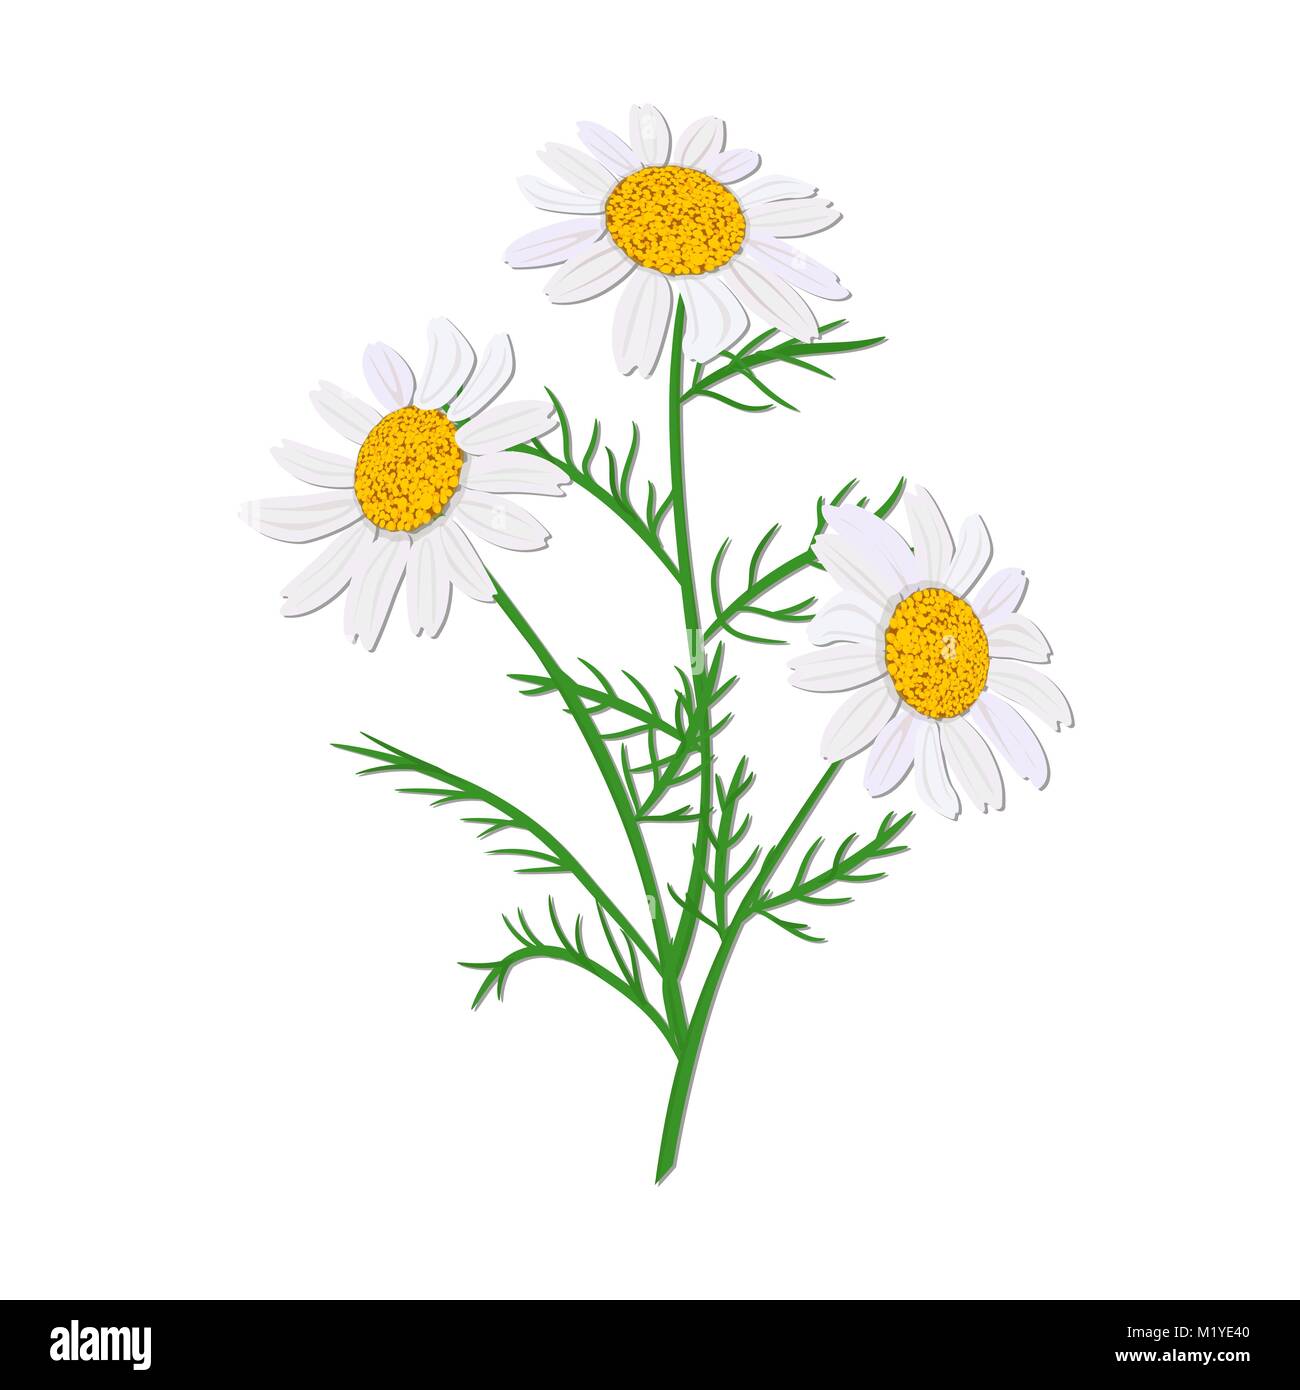 Daisy or chamomile. Wildflower isolated with stem. Design for invitation, wedding Stock Vector